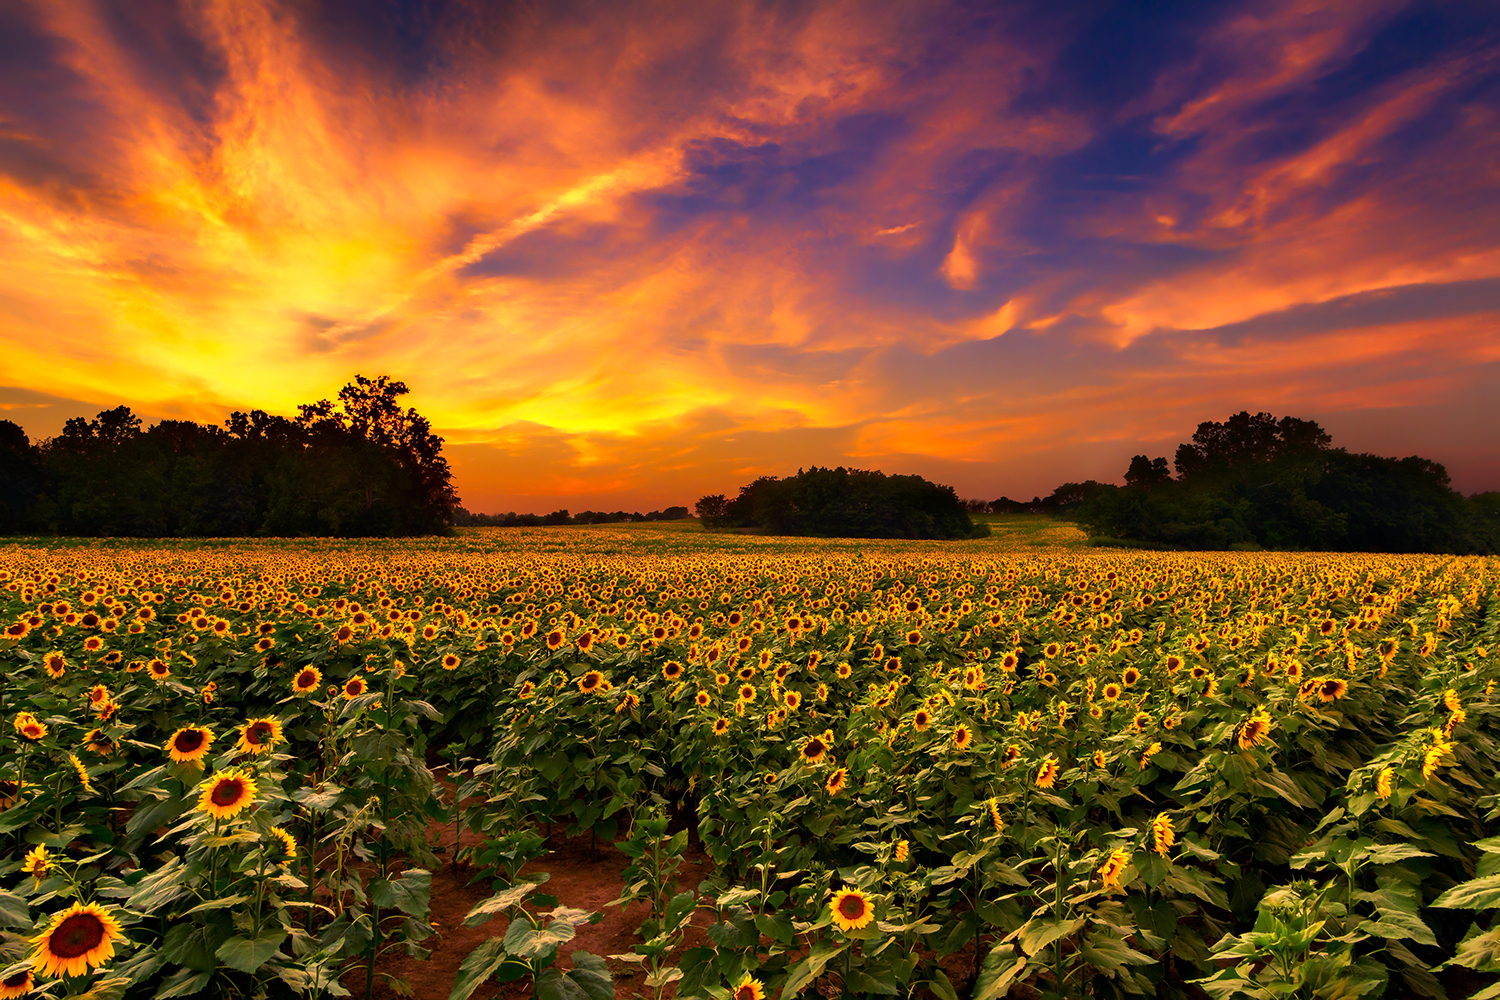 Field of sunflowers during sunset.